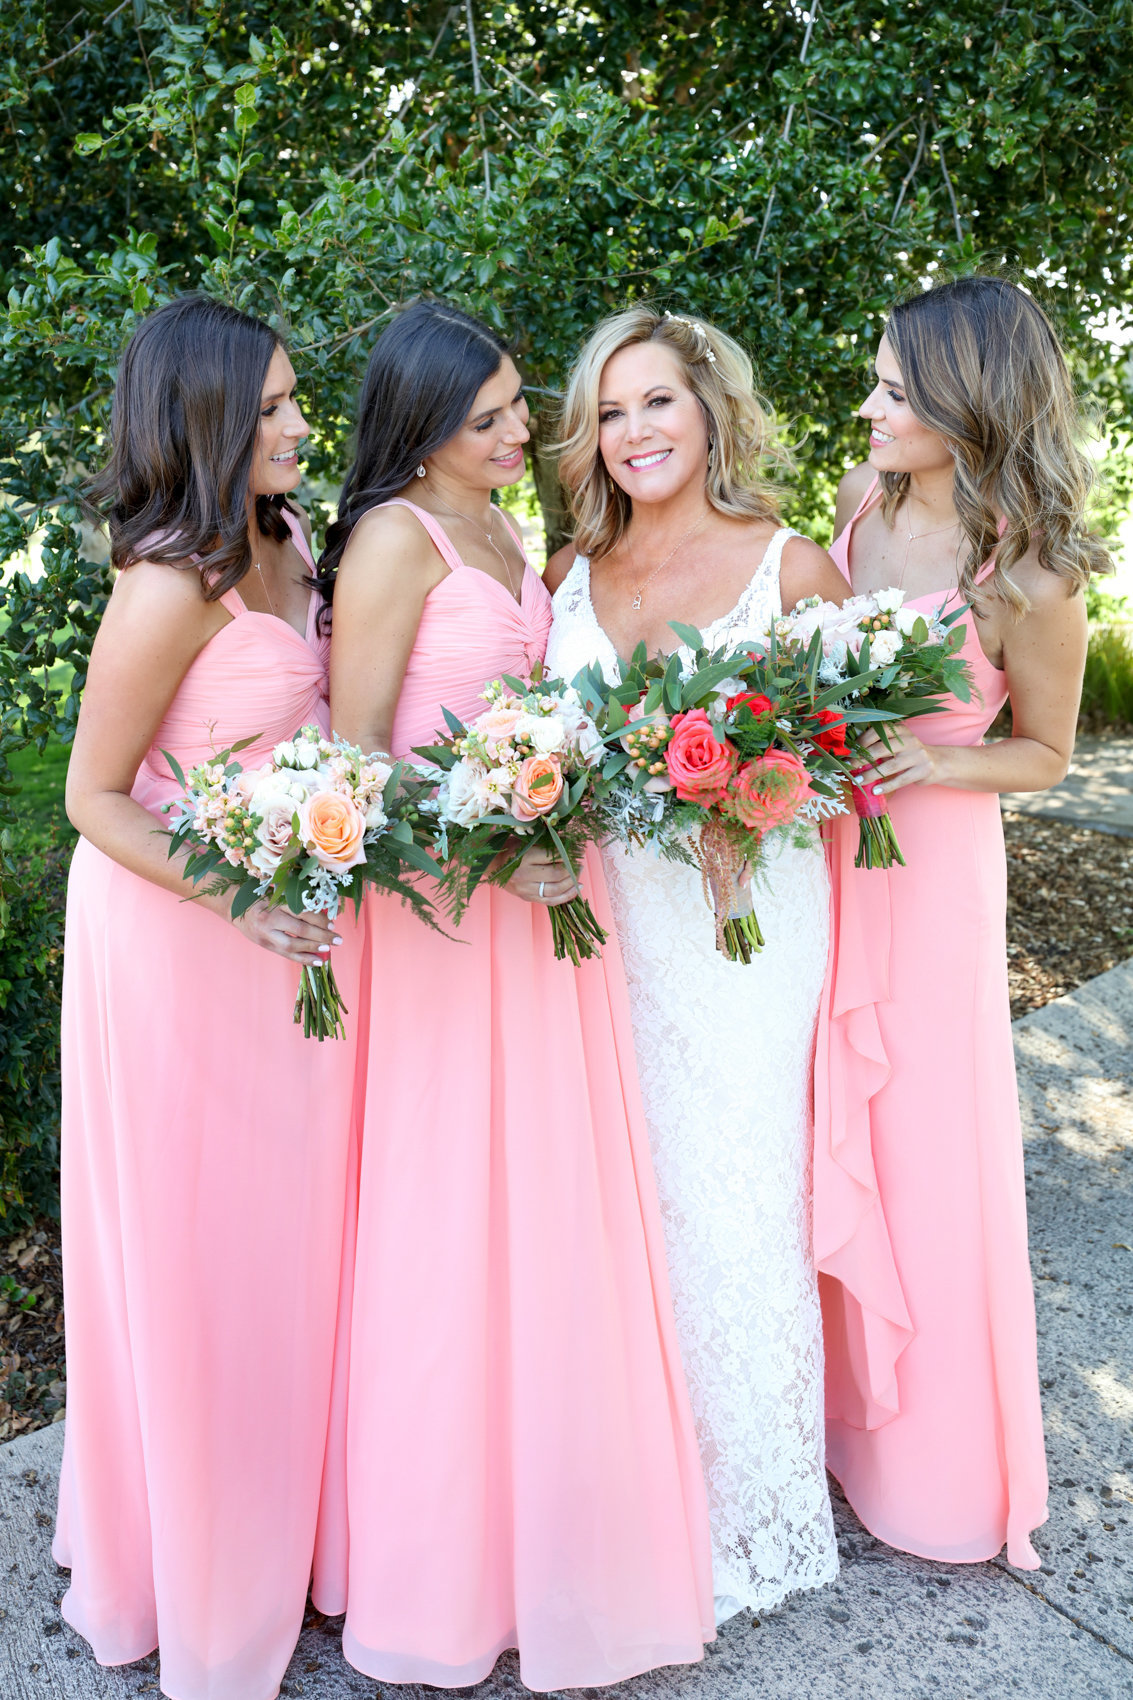 Portraits of bride with bridesmaids holding bouquets, outdoor portraits before wedding